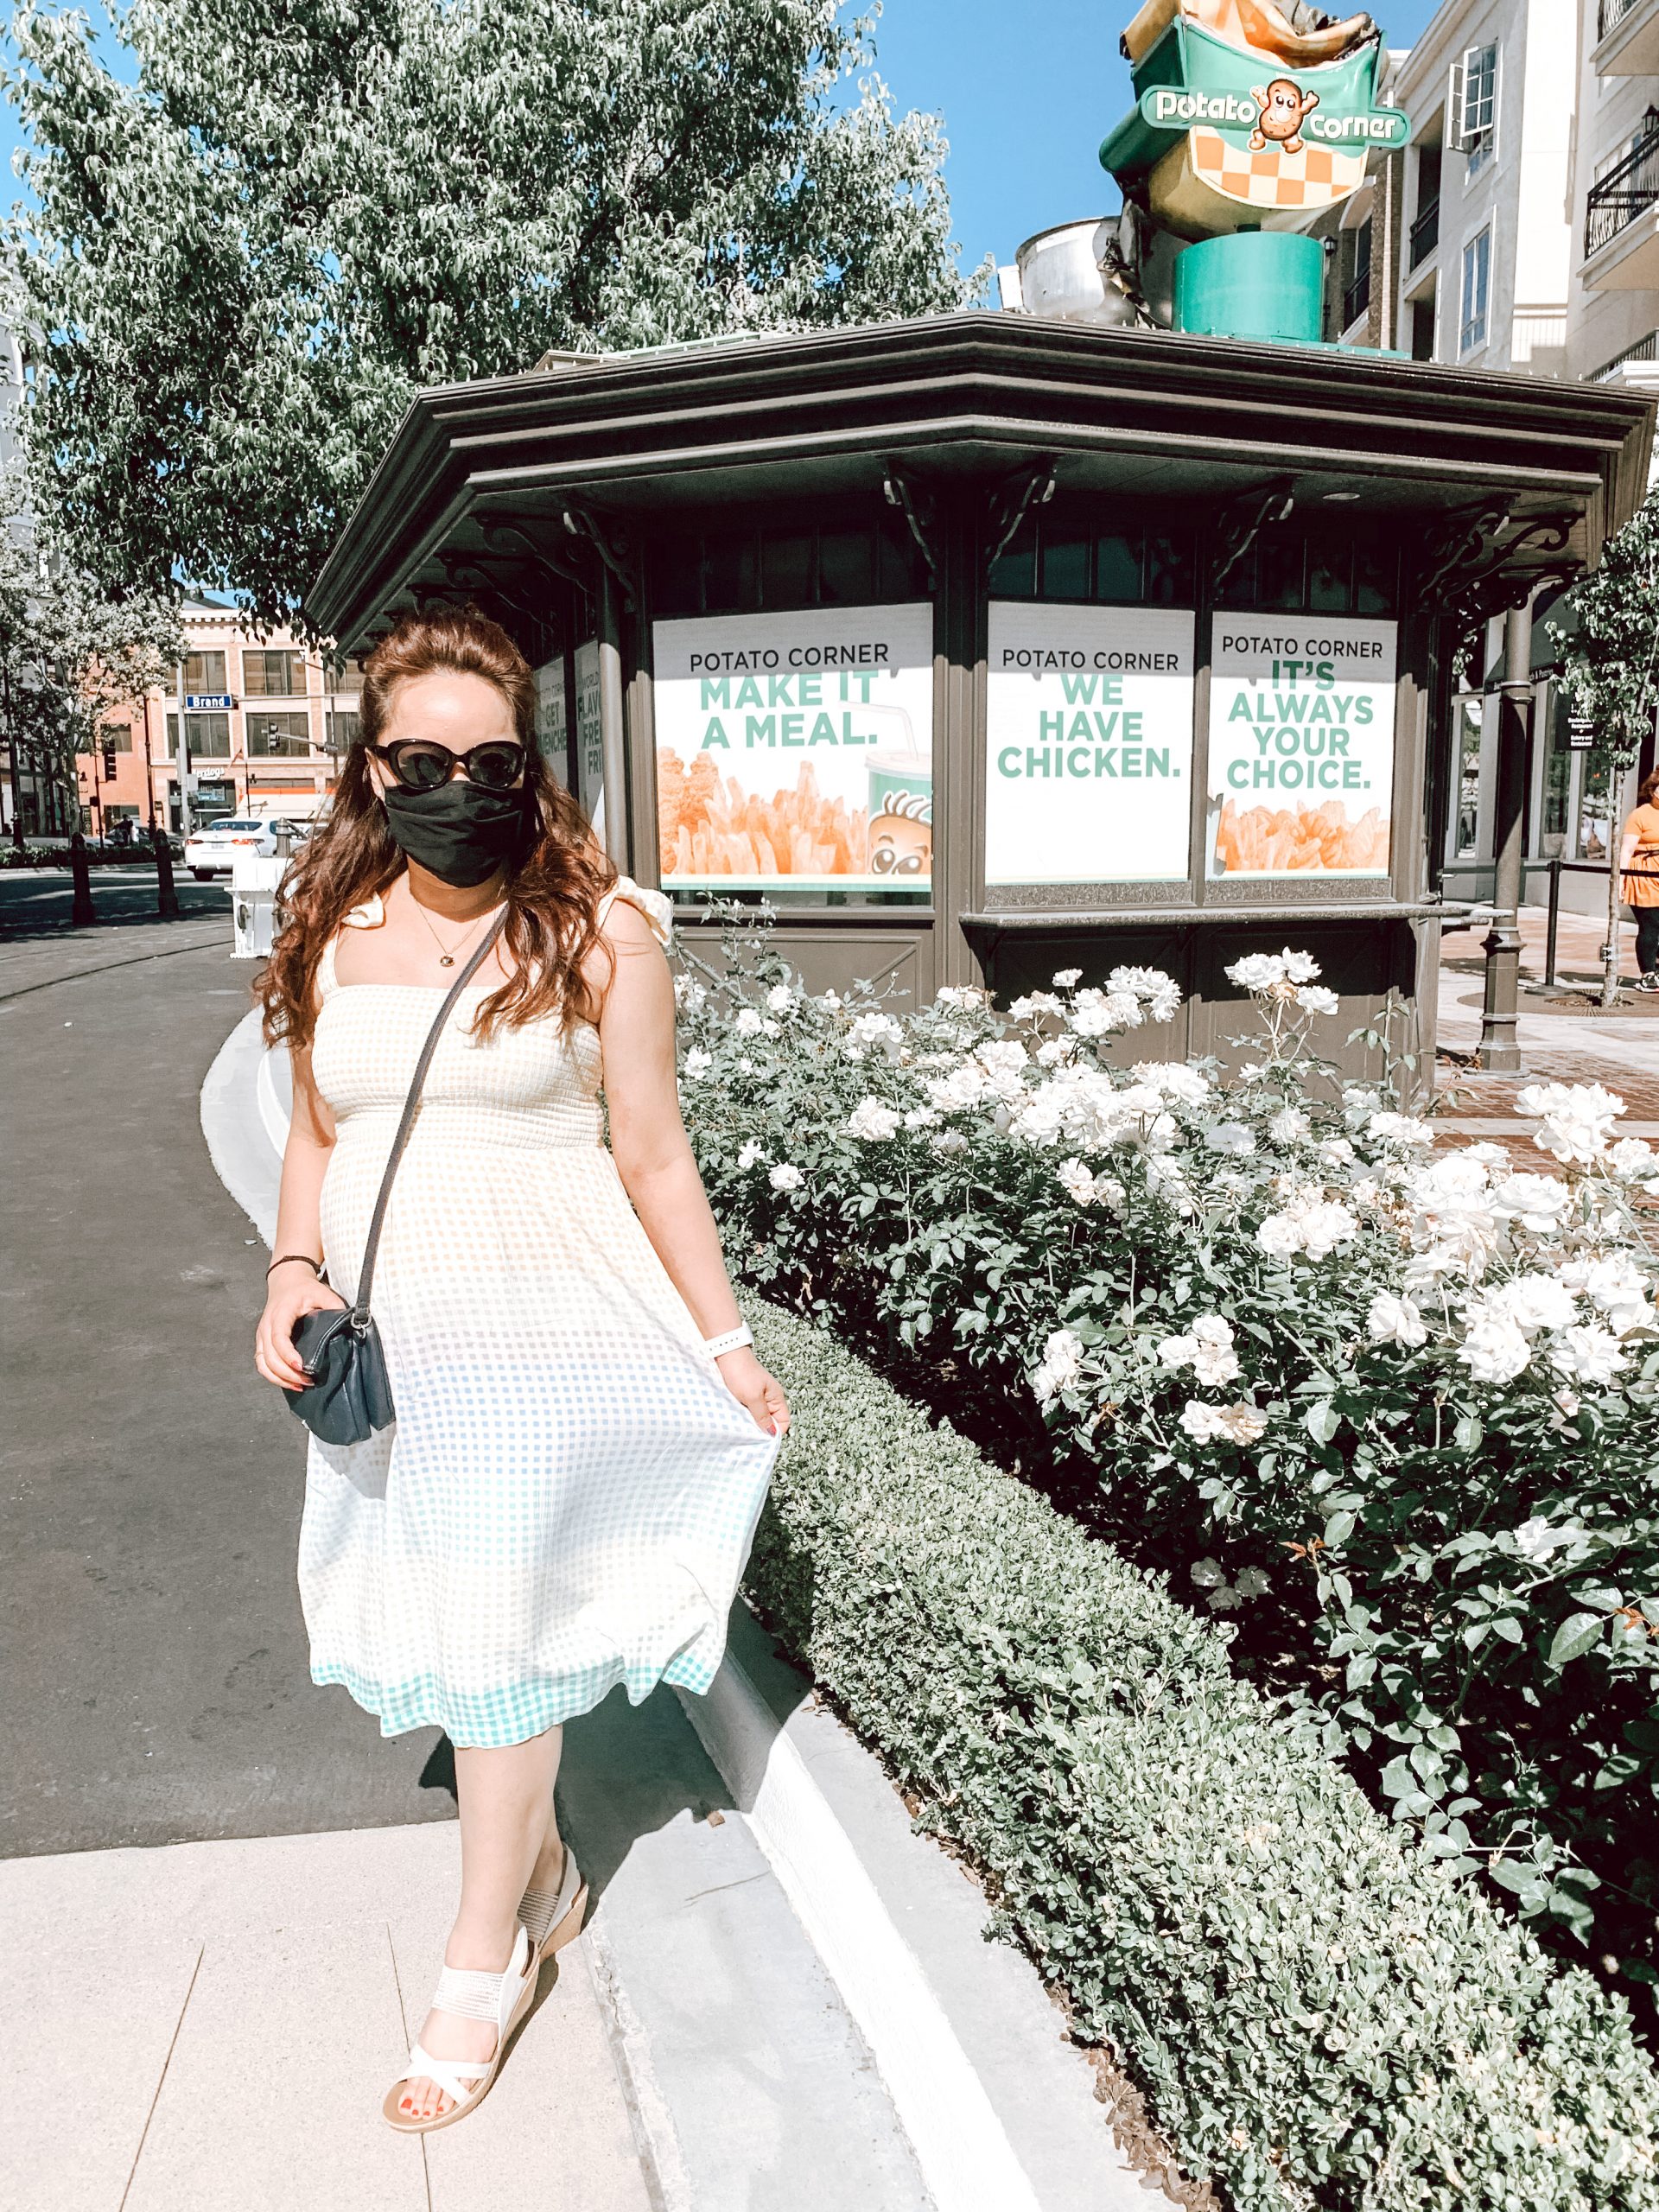 pslilyboutique-on-instagam-apple-watch-white-roses-hair-style-summer-2020-outfit-ideas-colorful-polka-dot-dress-los-angeles-fashion-blogger-feeling-groovy-IMG_9380, Instagram: @pslilyboutique, Pinterest, Los Angeles fashion blogger, top fashion blog, best fashion blog, fashion & personal style blog, travel blog, lifestyle blogger, travel blogger, LA fashion blogger, chicago based fashion blogger, fashion influencer, luxury fashion, luxury travel, luxury influencer, luxury lifestyle, lifestyle blog, amazon influencer